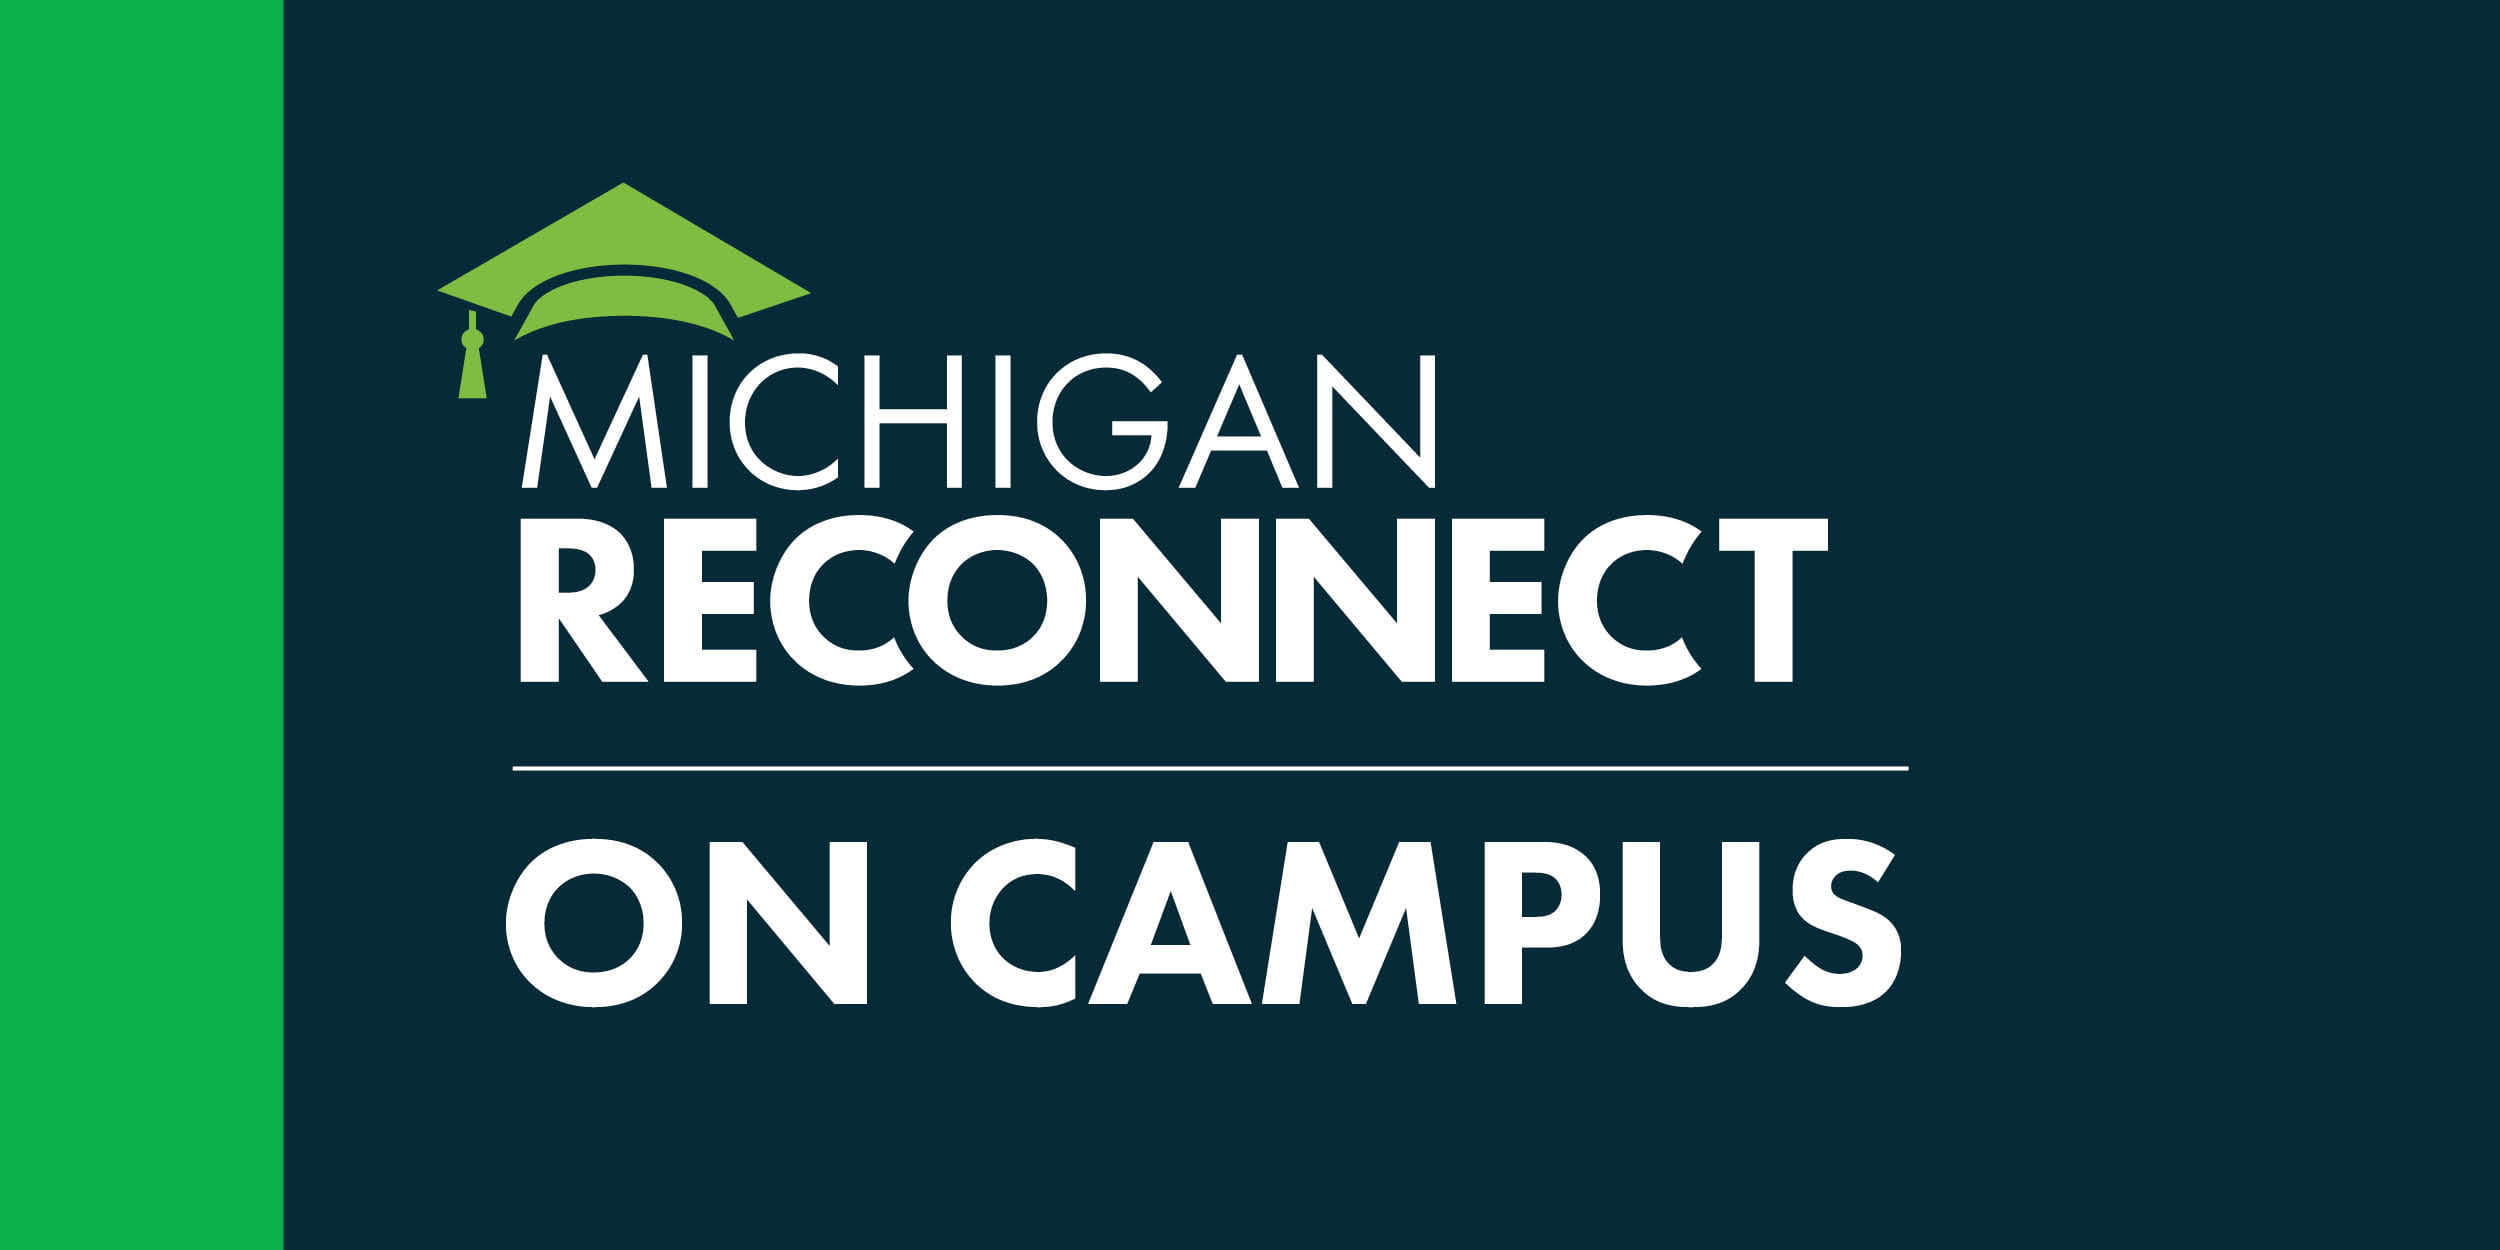 Michigan Reconnect On Campus